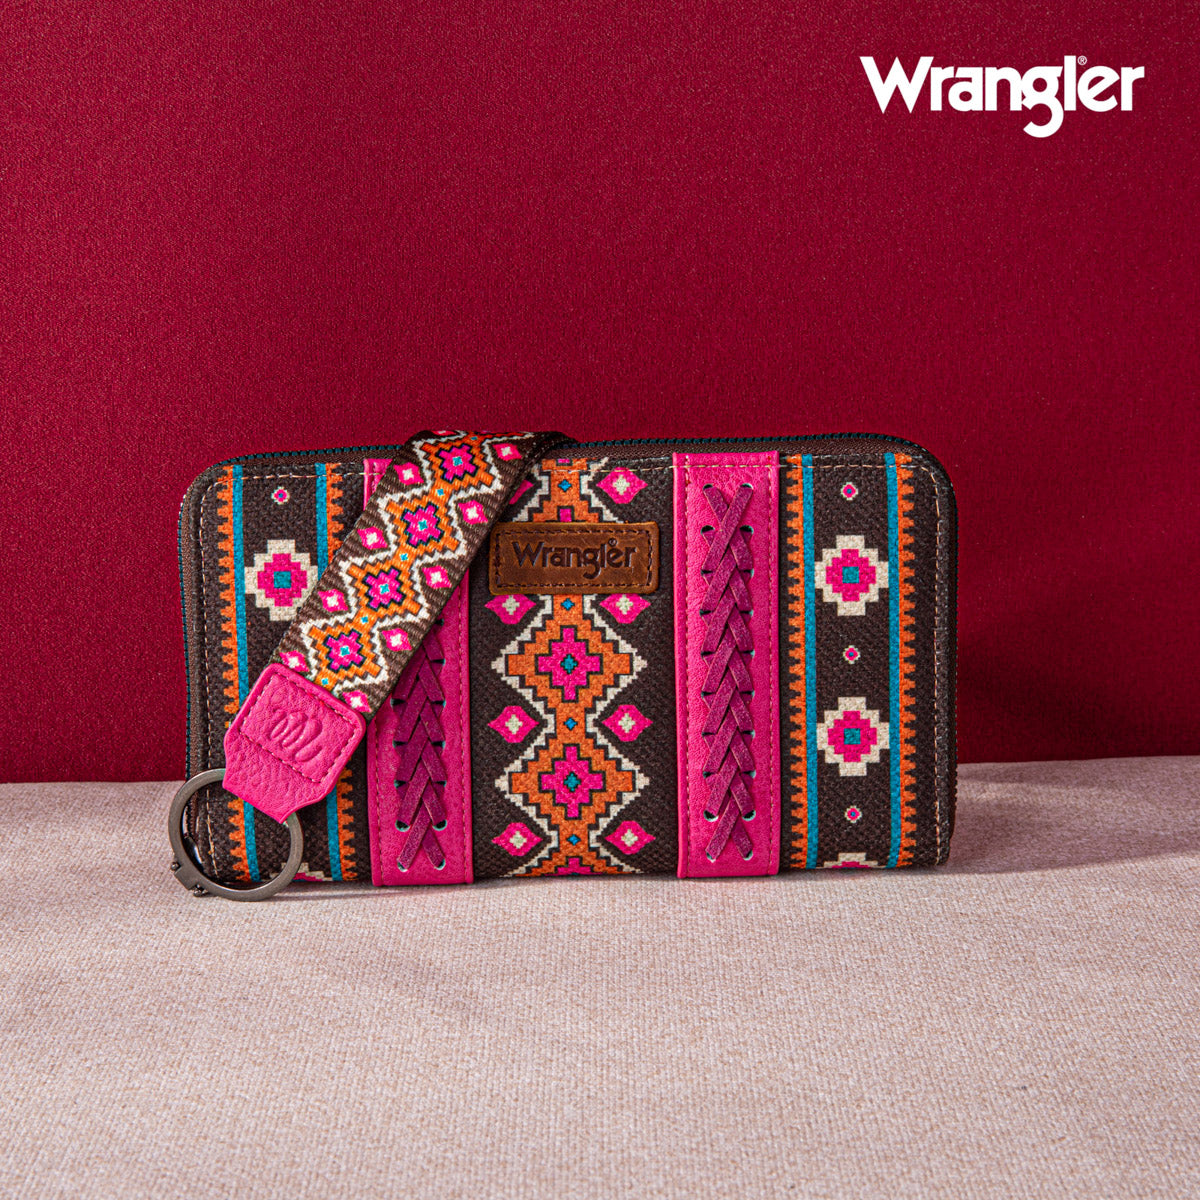 Wrangler Allover Aztec Dual Sided Print Canvas Wallet